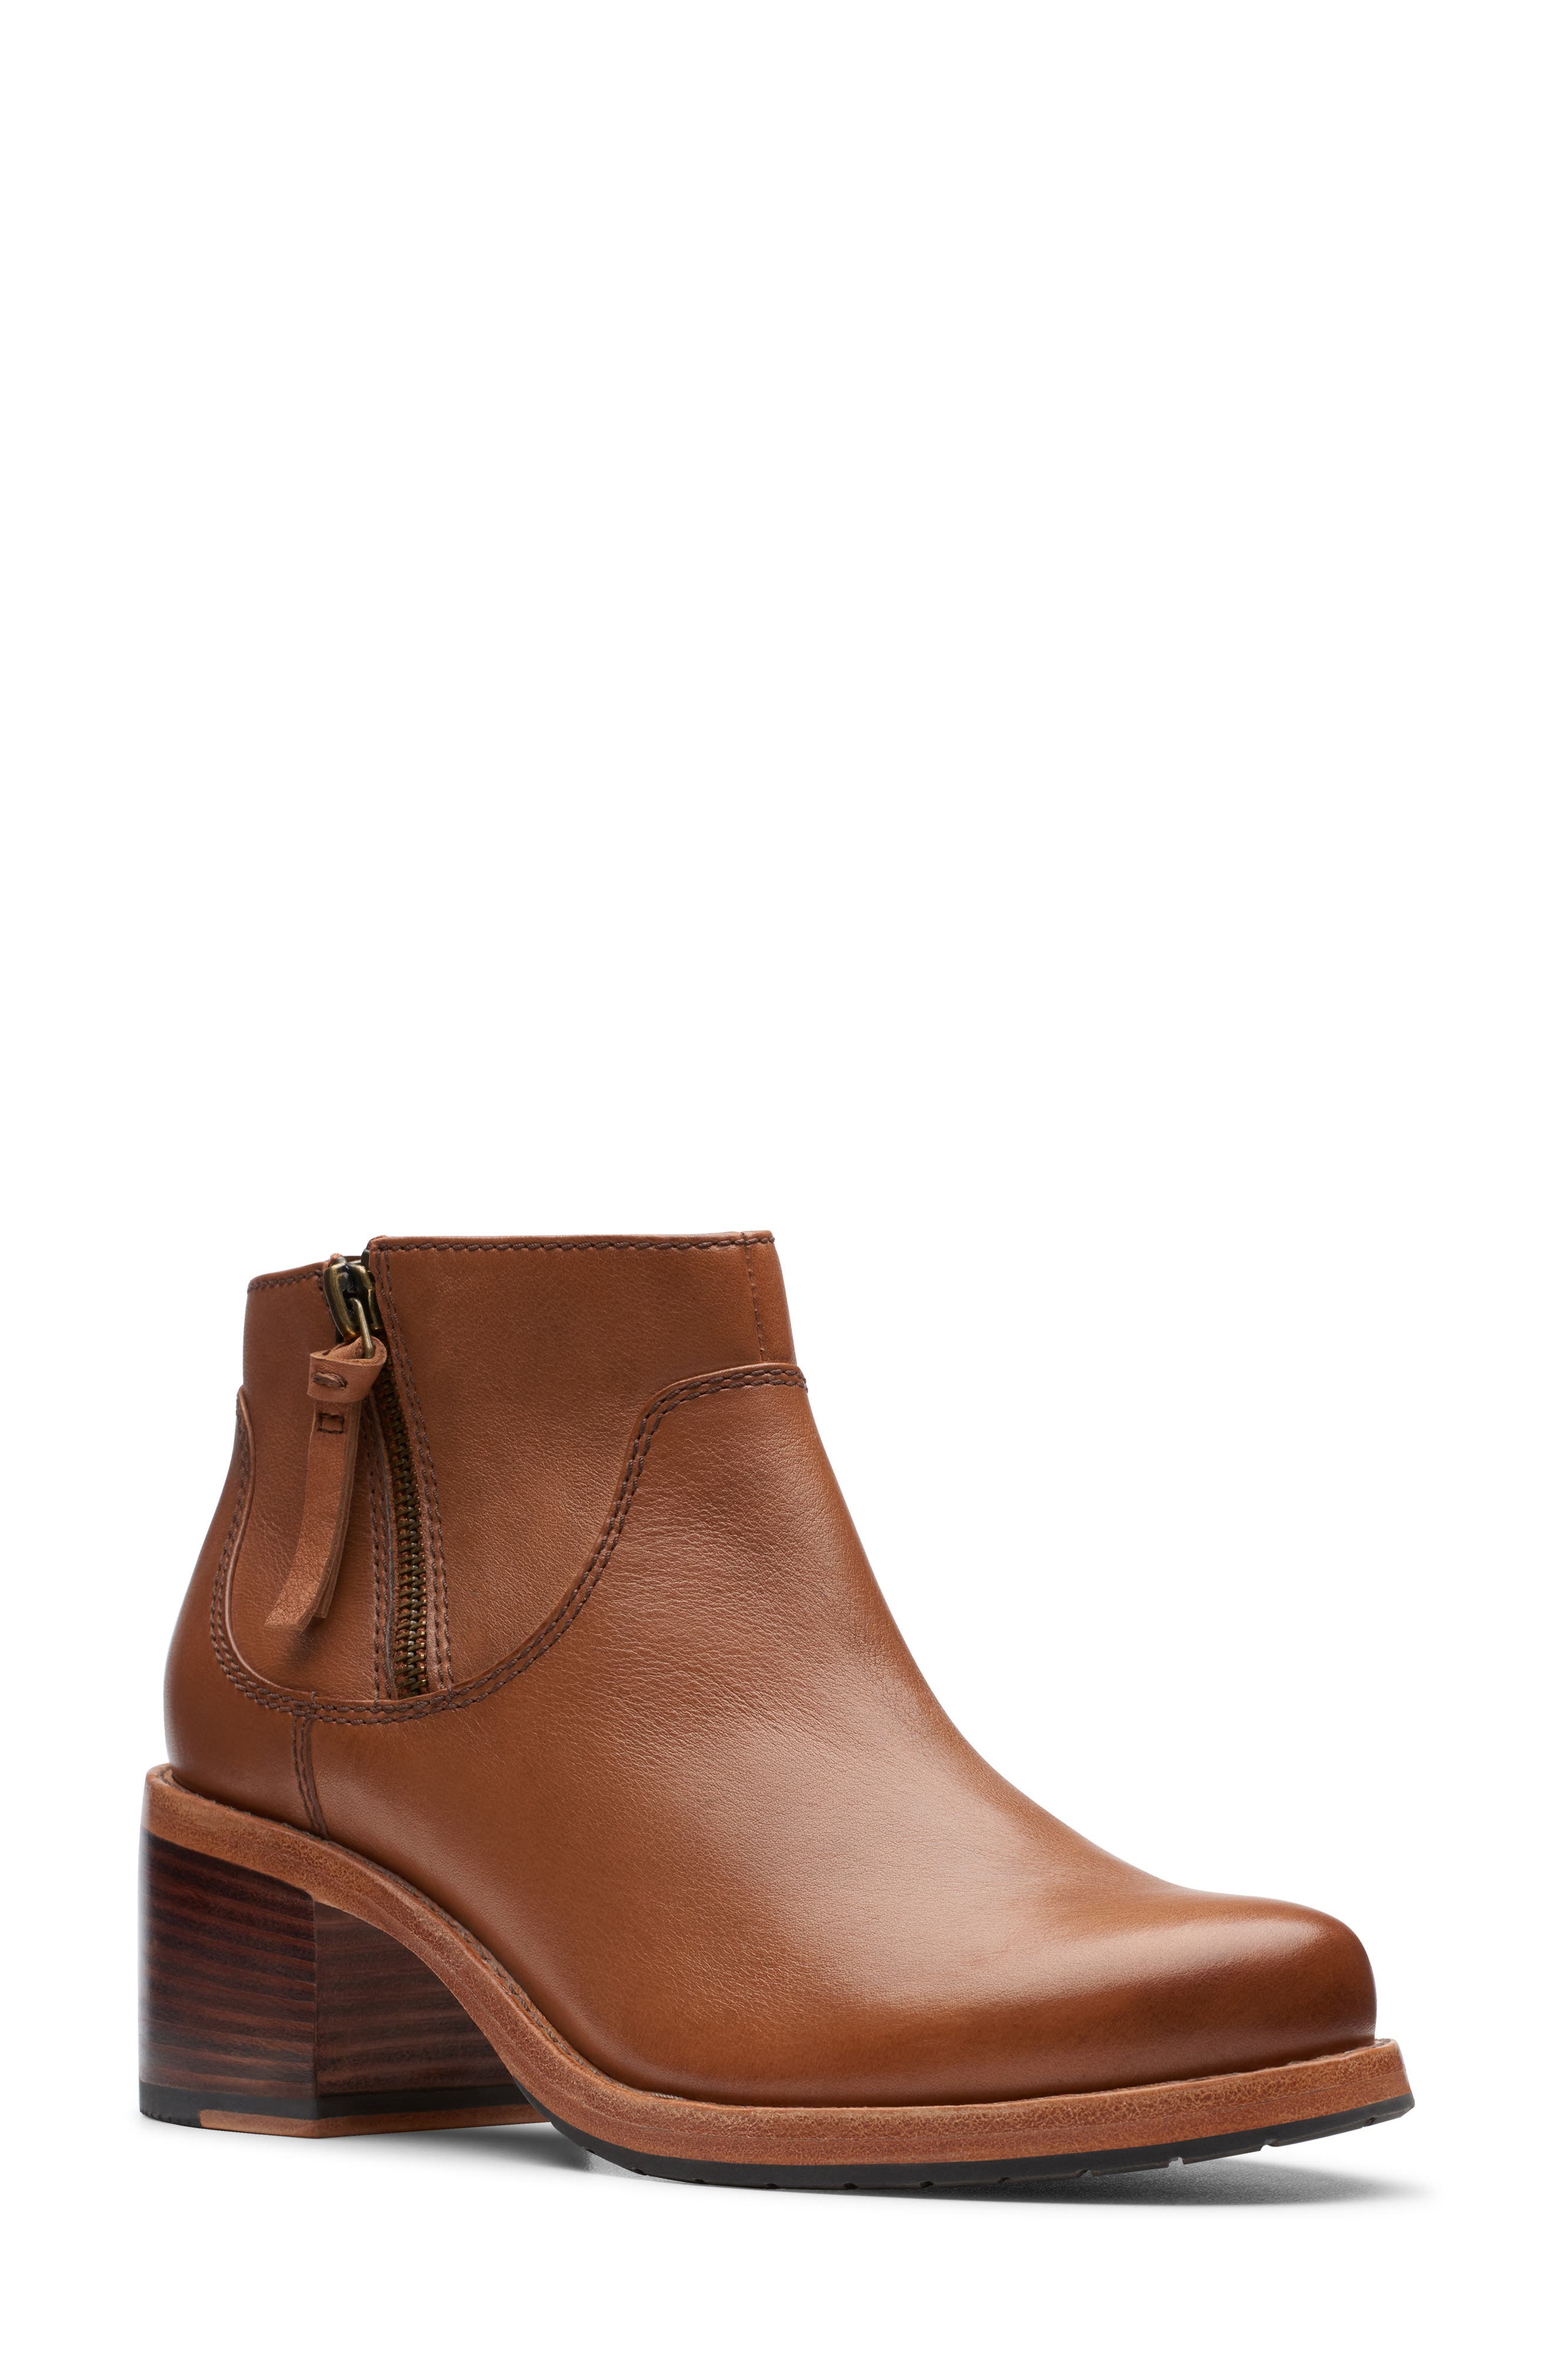 Clarks Ada Chelsea Italy, SAVE 60% -